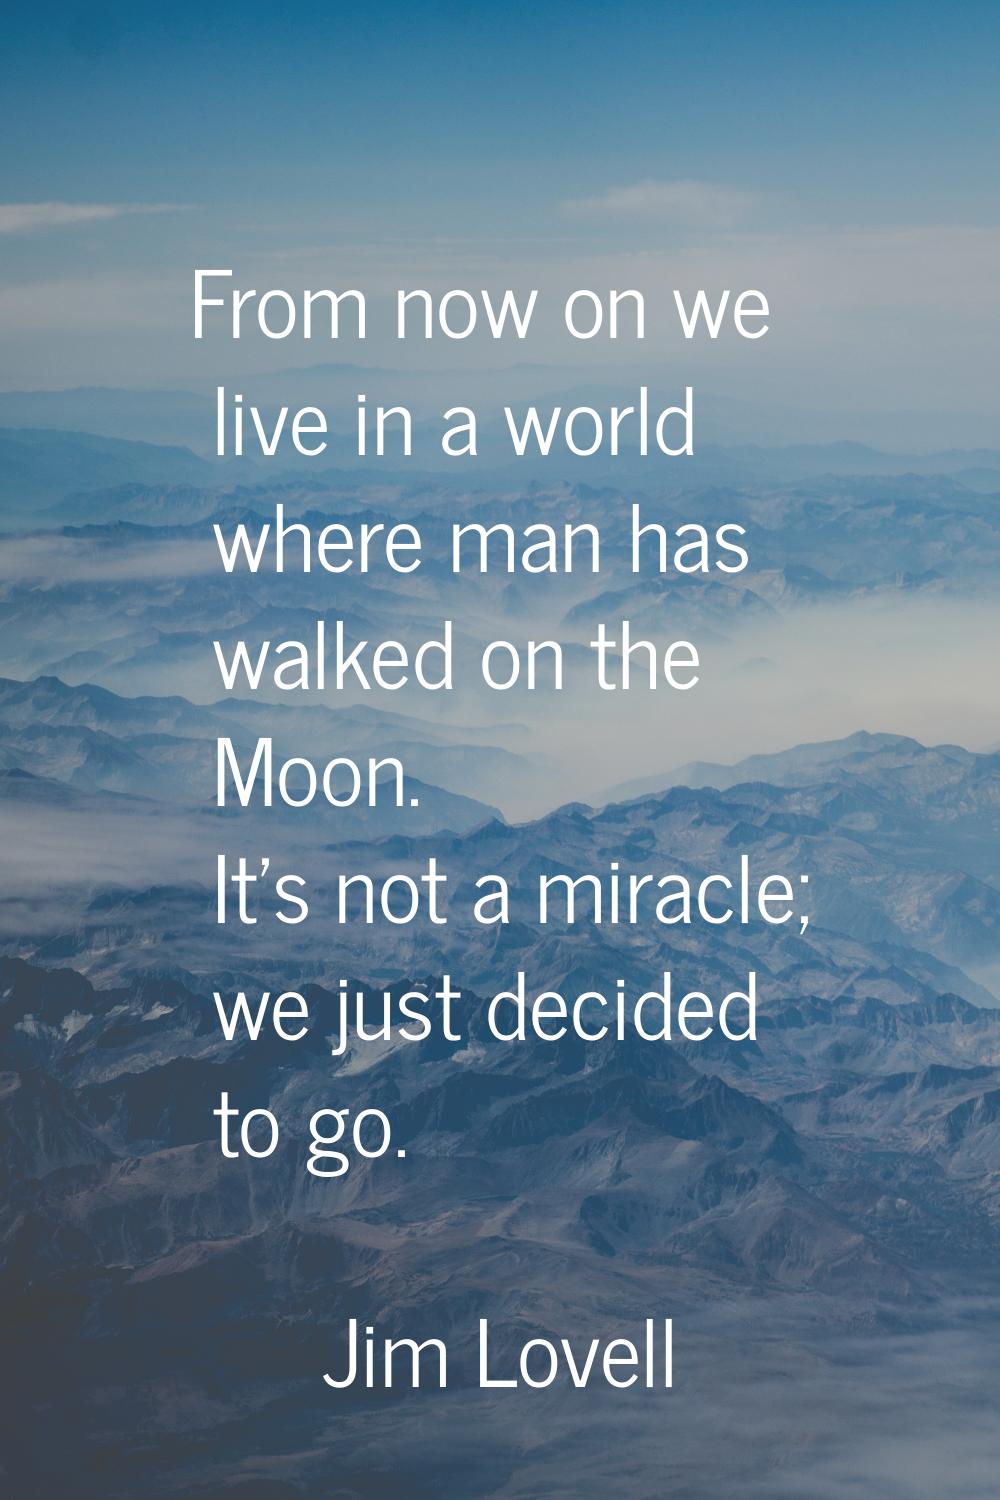 From now on we live in a world where man has walked on the Moon. It's not a miracle; we just decide